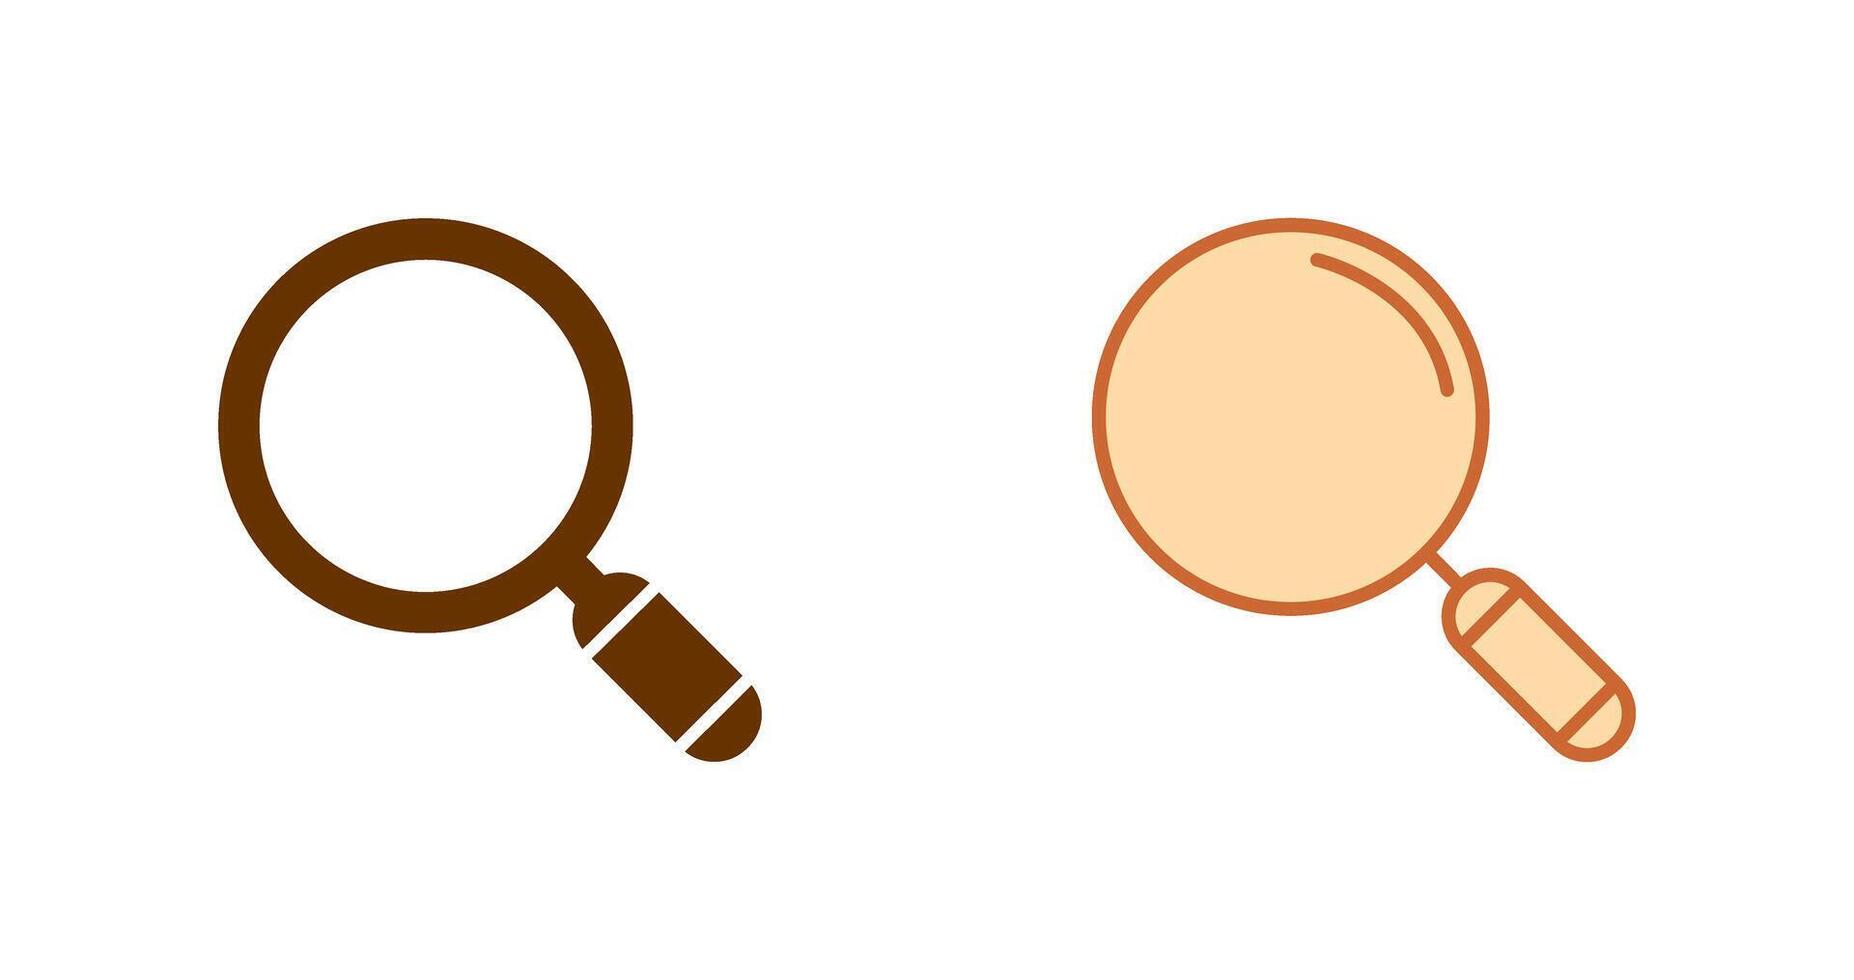 Magnifying Glass Icon vector